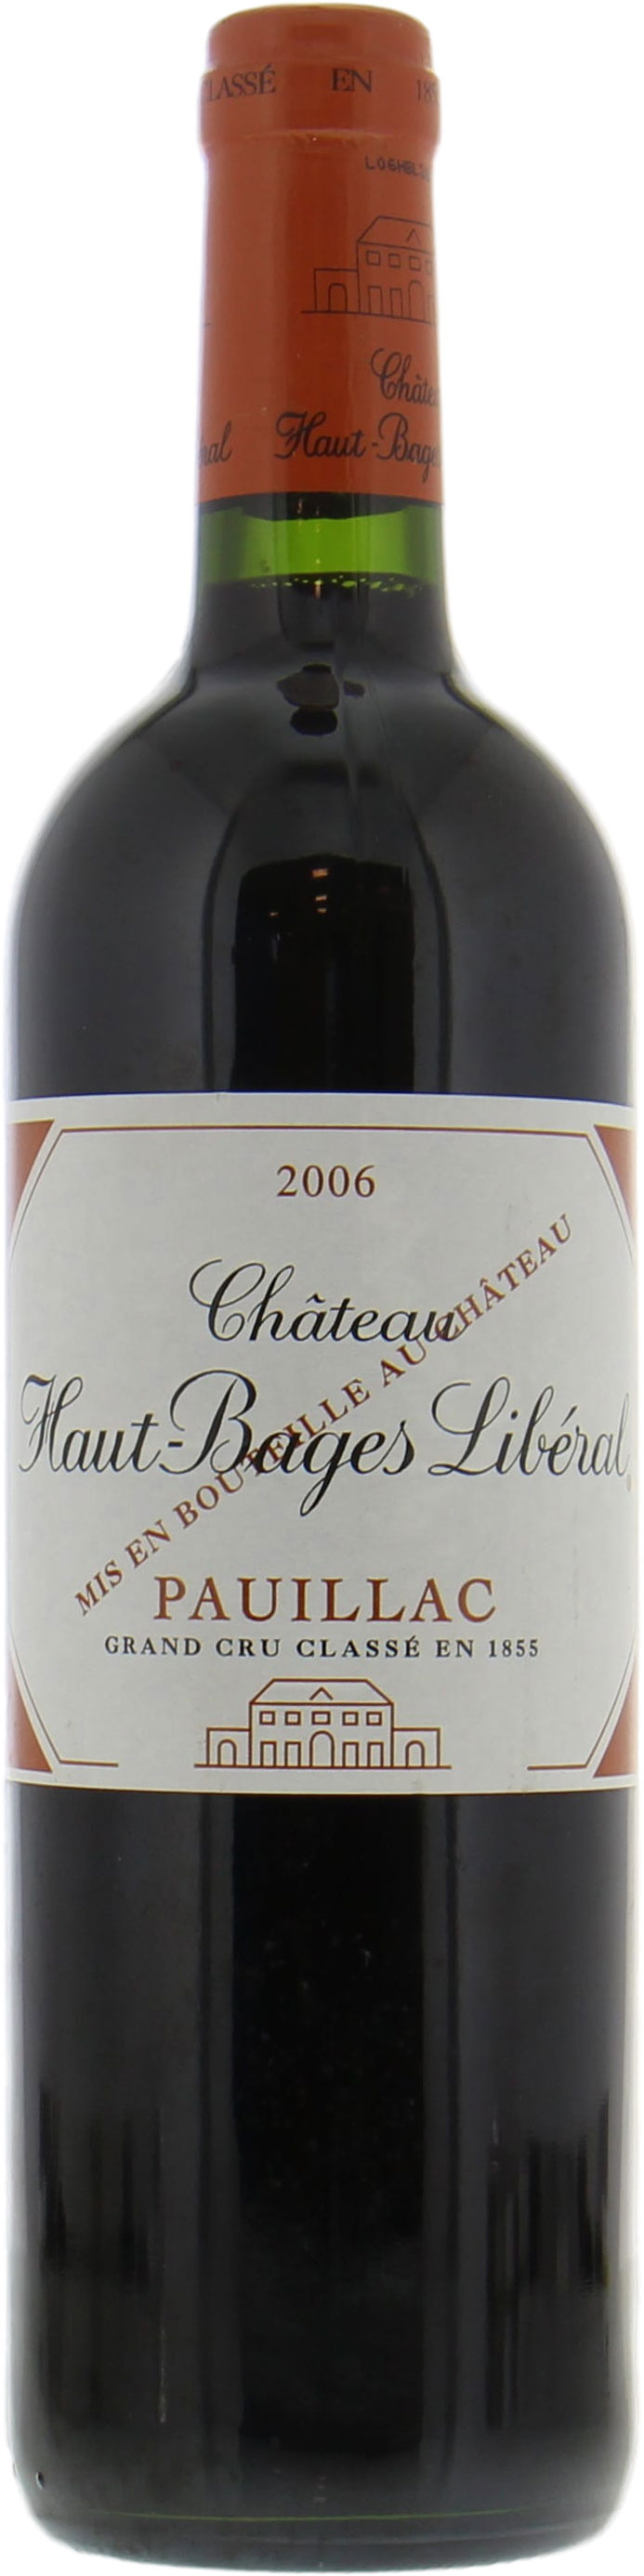 Chateau Haut Bages Liberal - Chateau Haut Bages Liberal 2006 Perfect